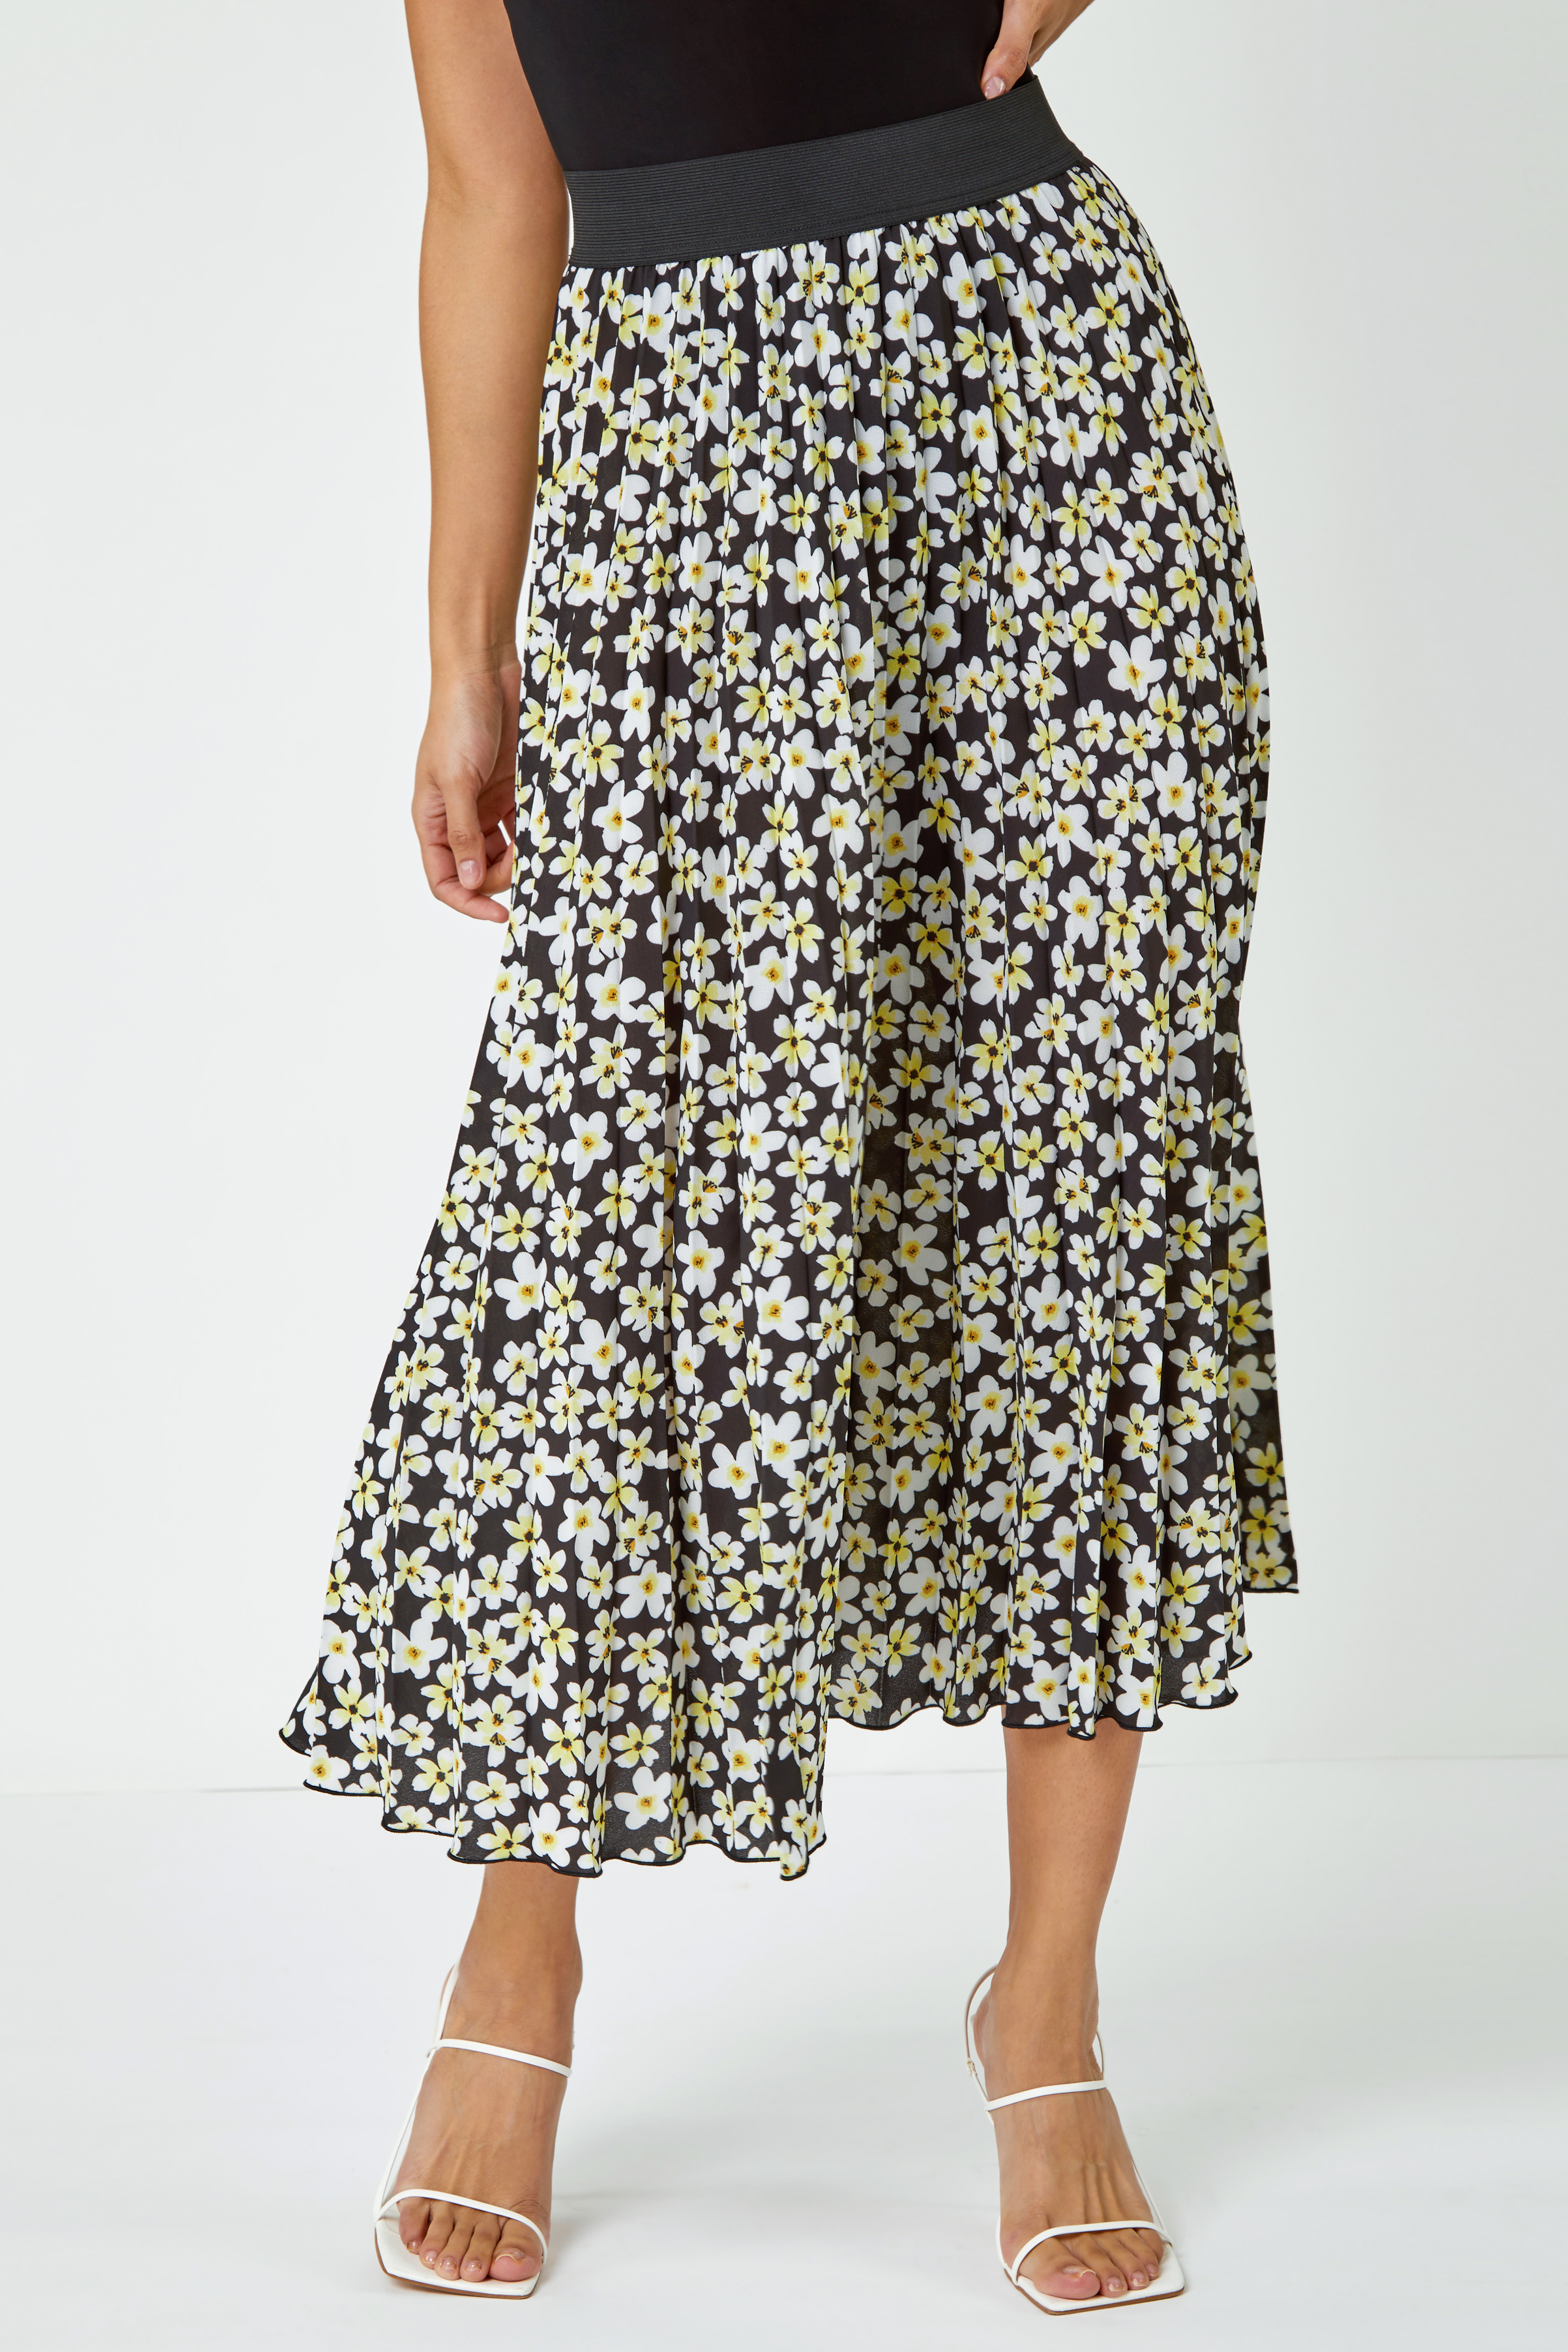 Black Daisy Floral Print Pleated Skirt, Image 2 of 5